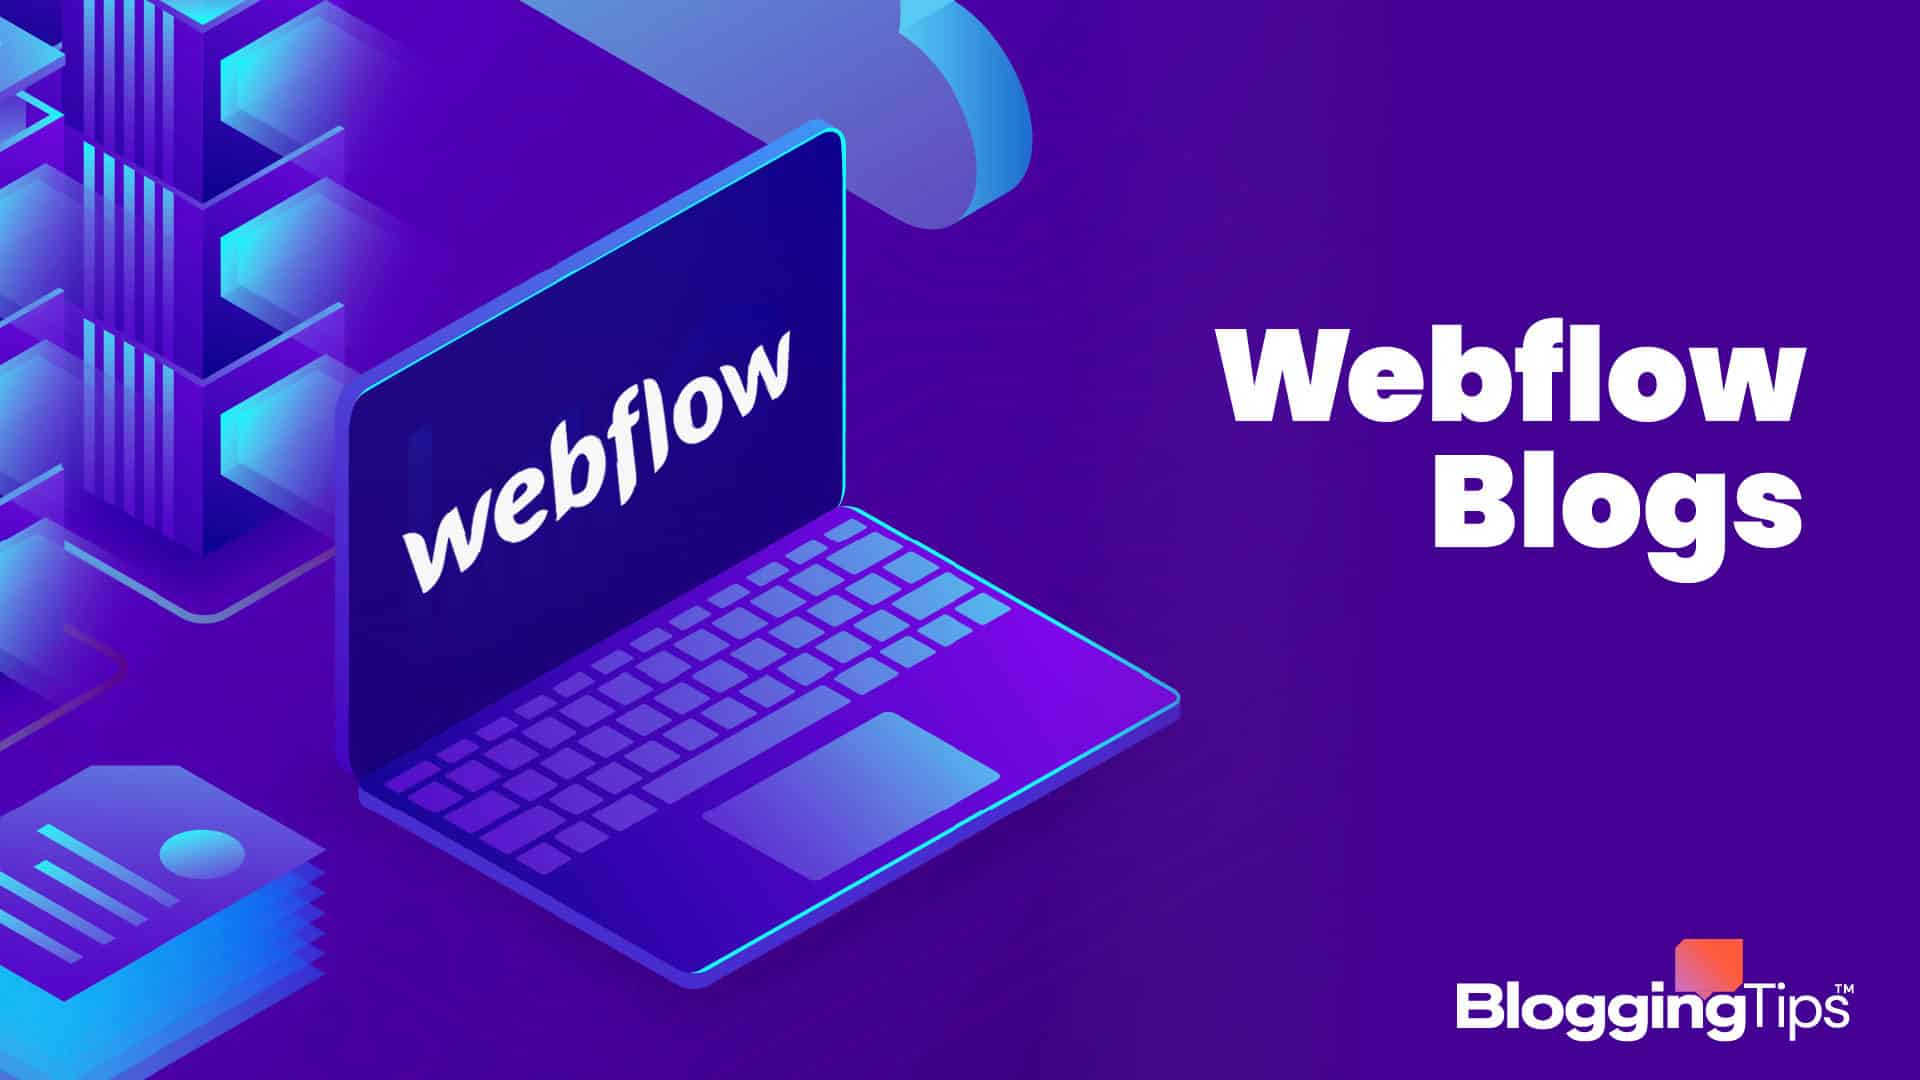 vector graphic showing an illustration of a webflow logo on a computer screen with the big block text 